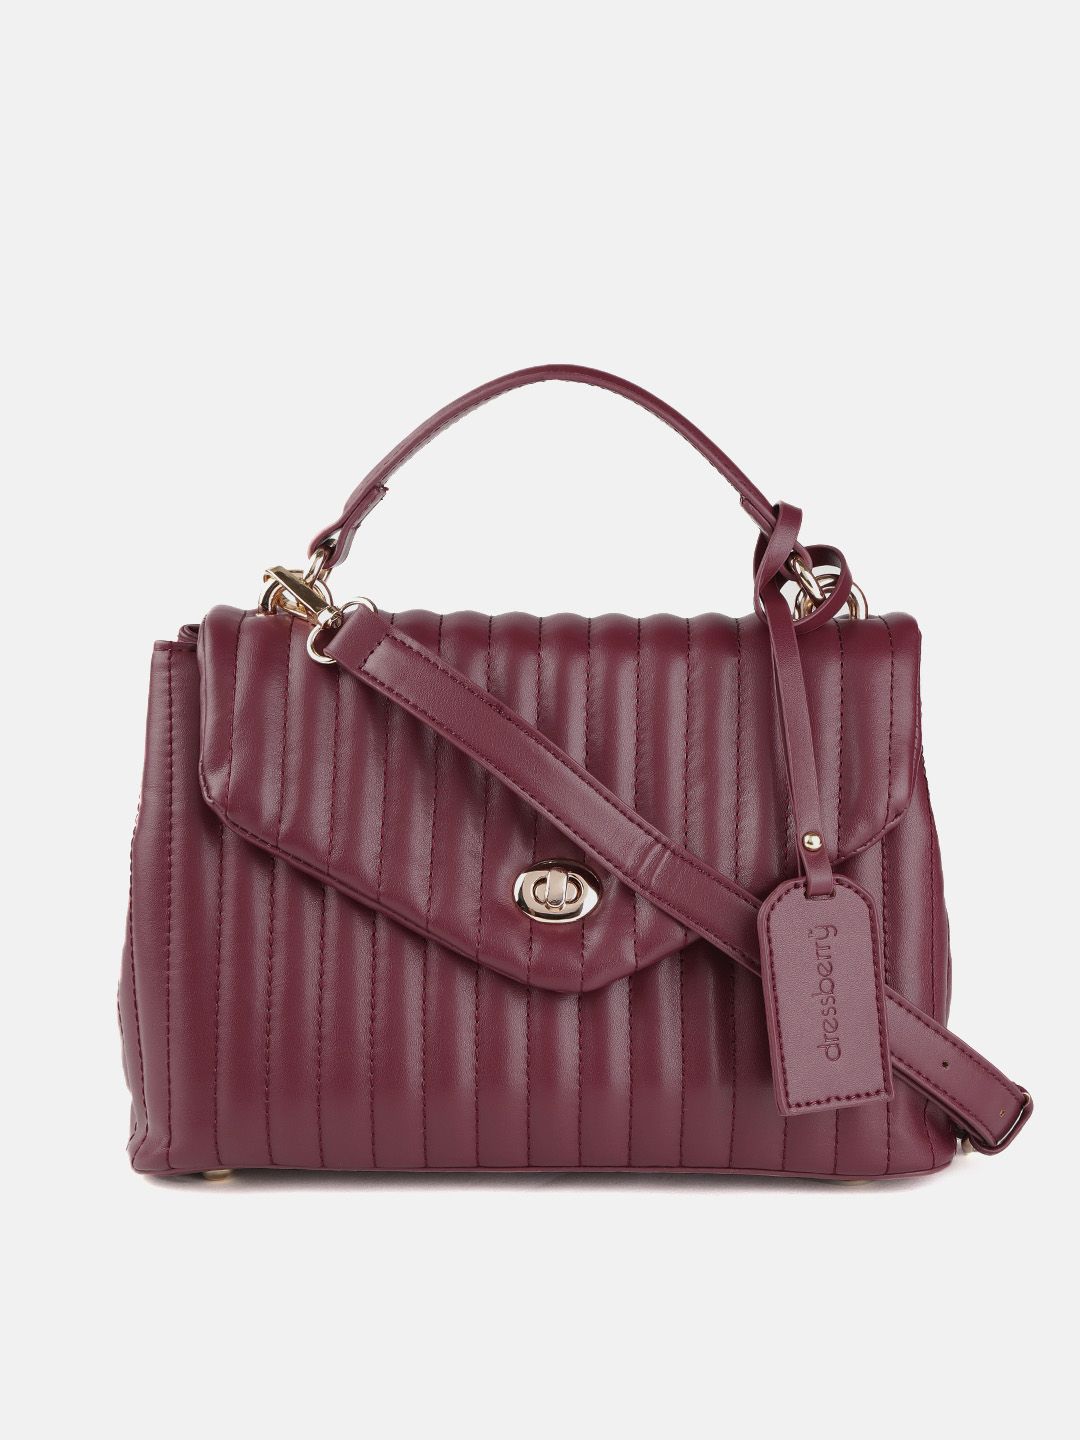 DressBerry Maroon Quilted Satchel Bag Price in India